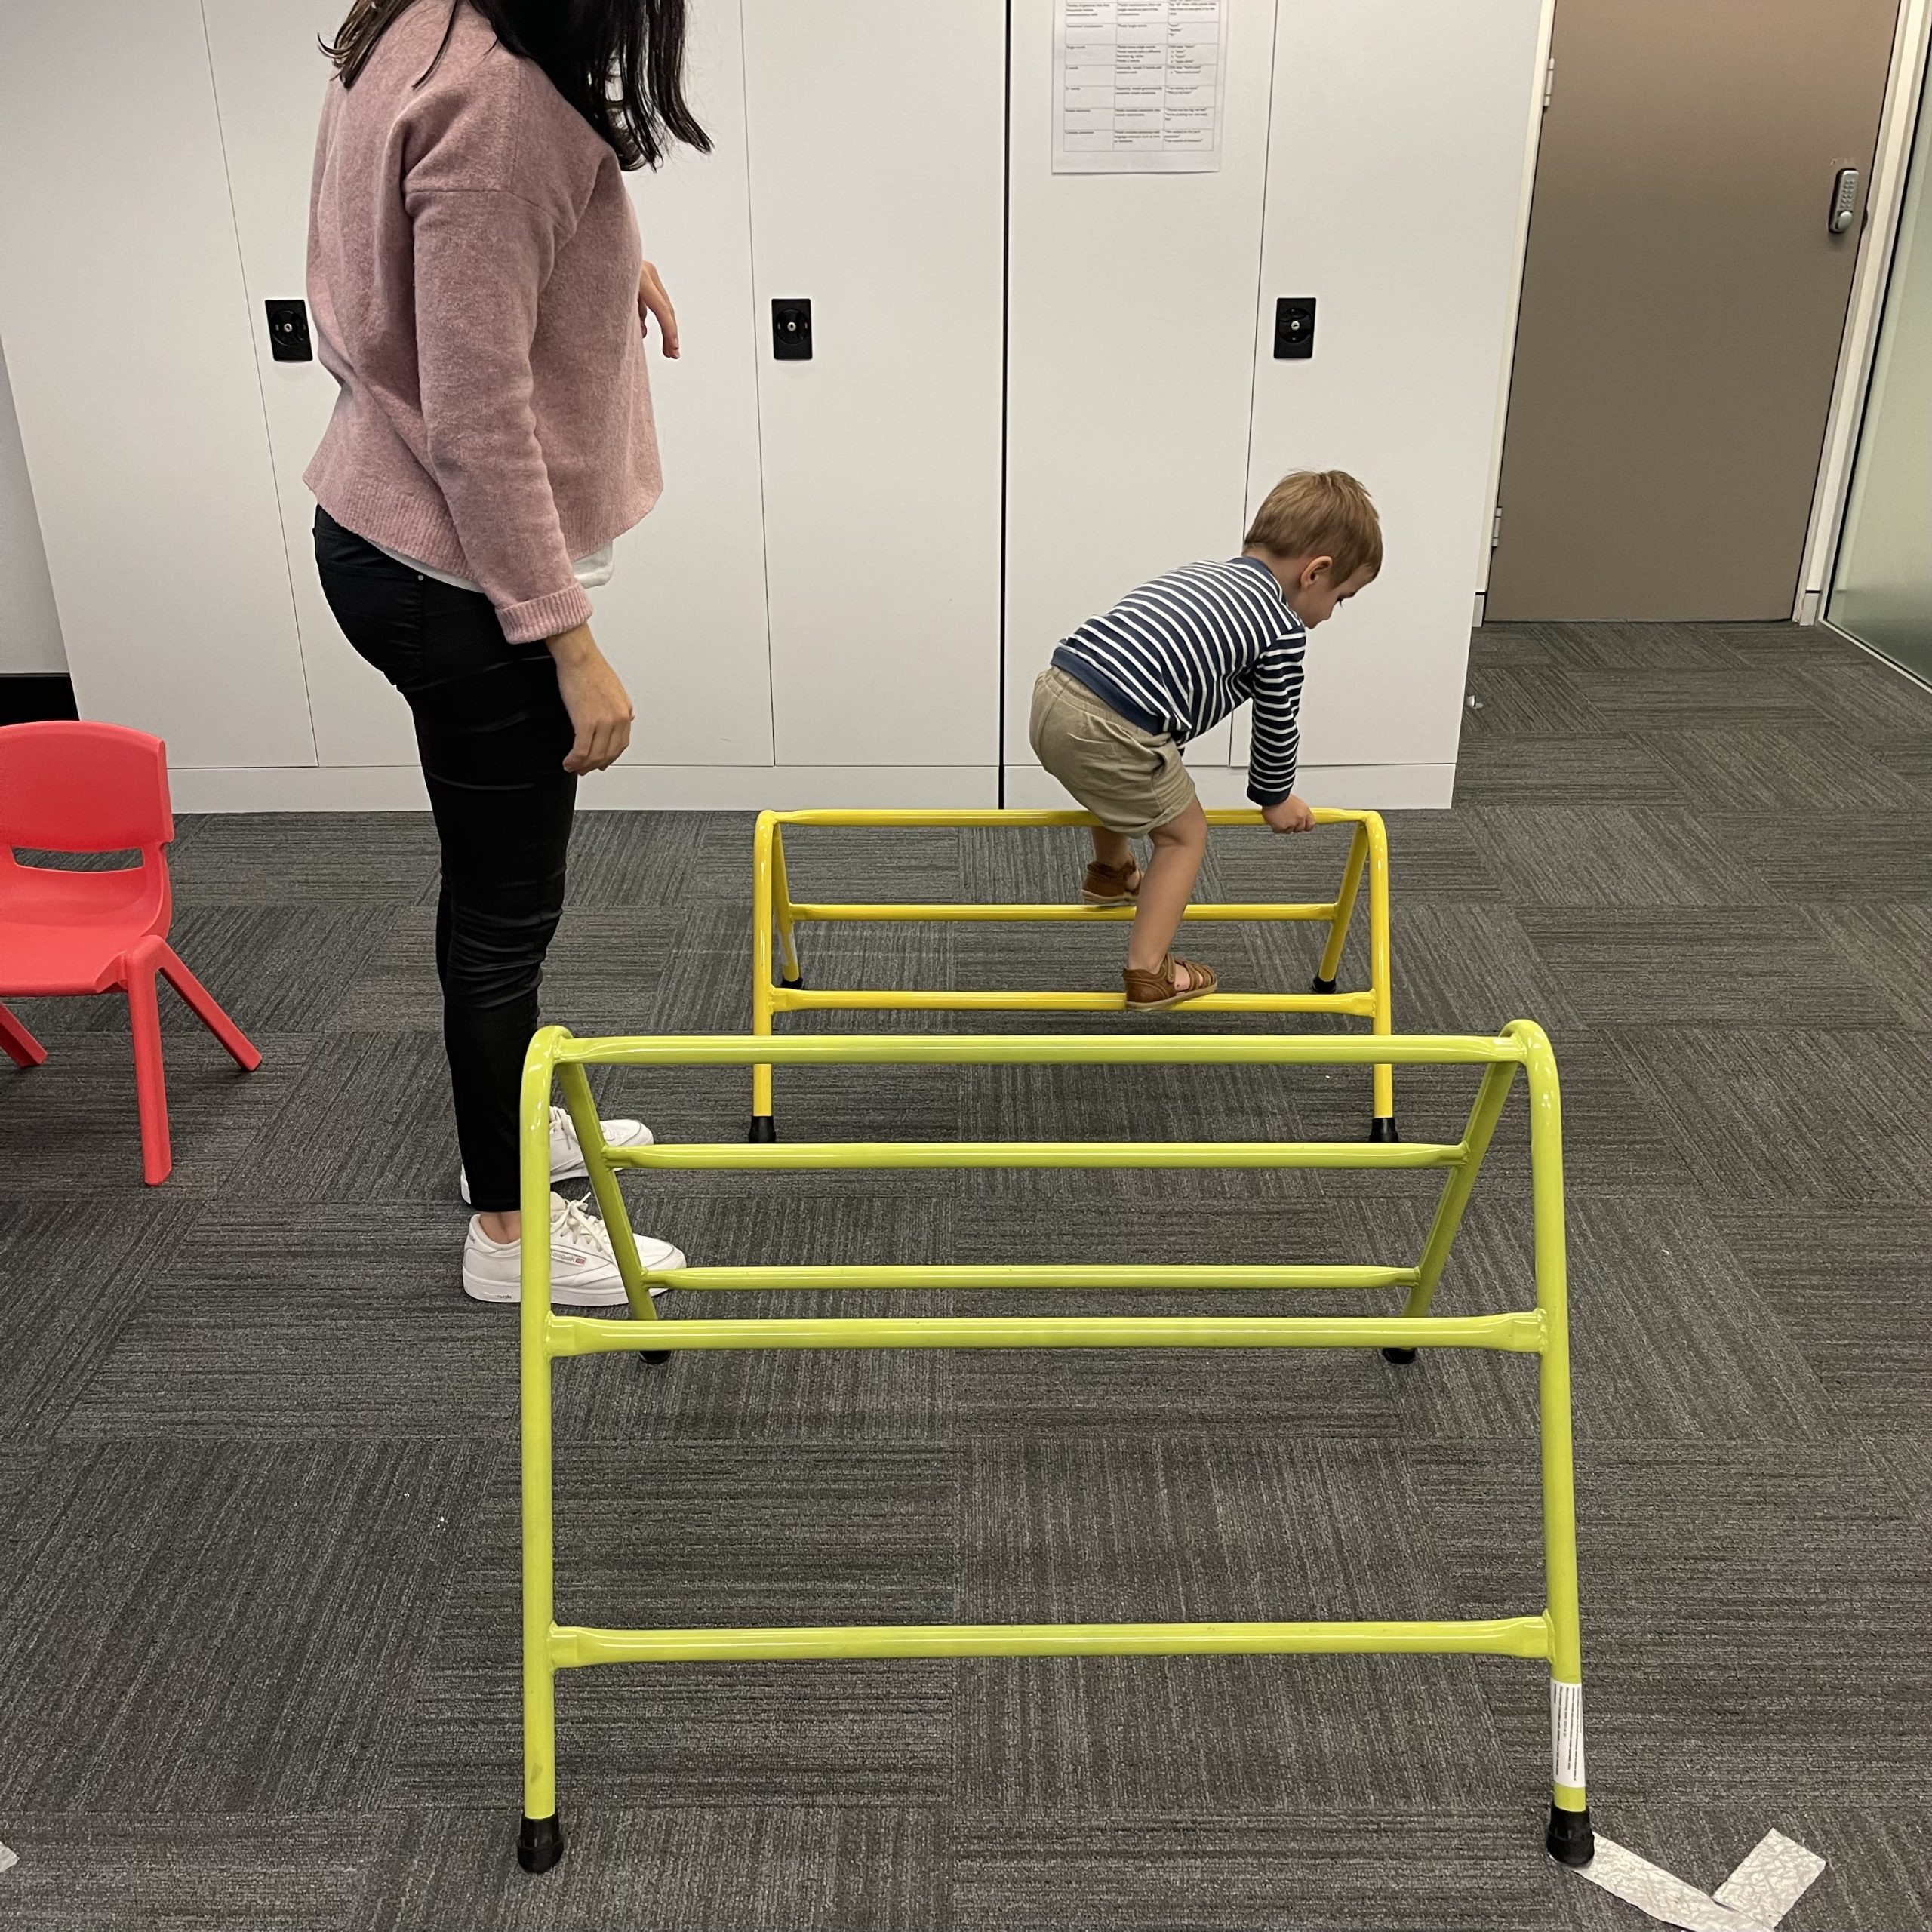 Child with Developmental Delay or Global Developmental Delay climbing in an Occupational Therapy session with an Occupational Therapist in Bondi Junction and Mascot in Sydney